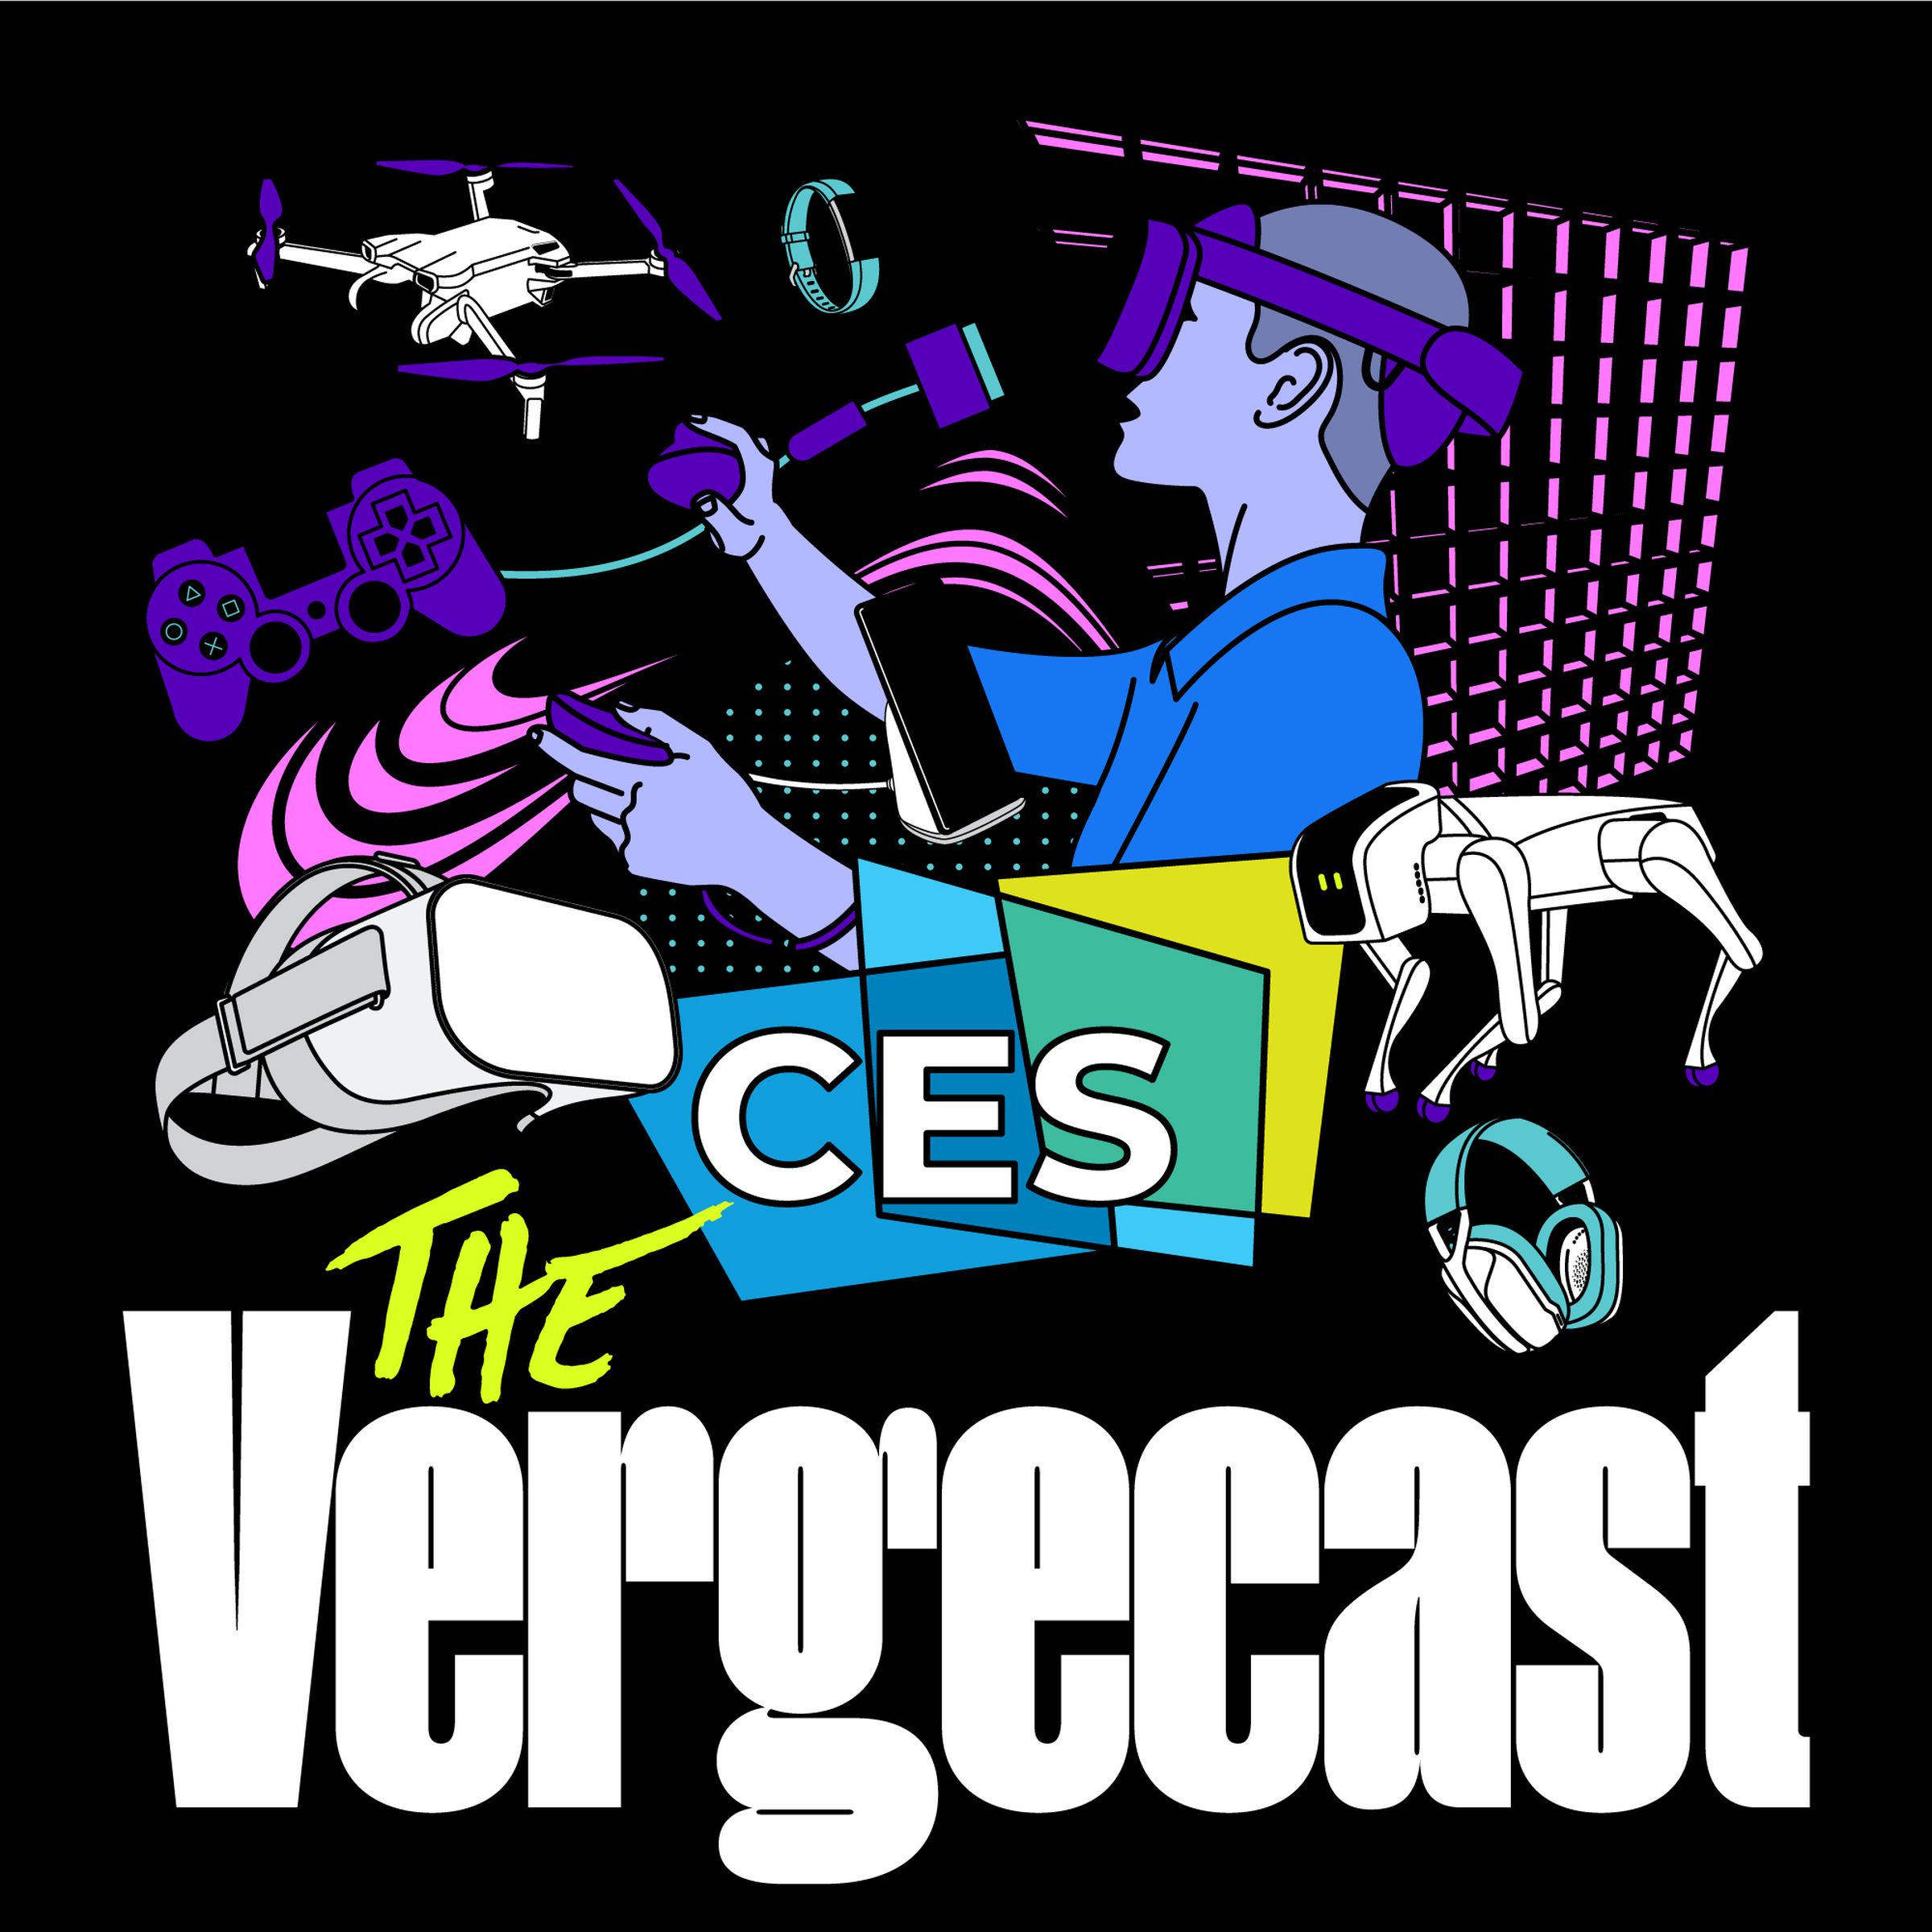 The CES and the Vergecast logos, with an artist’s rendition of a number of major products including, an Oculus Quest, drone, game controller, and robot dog.